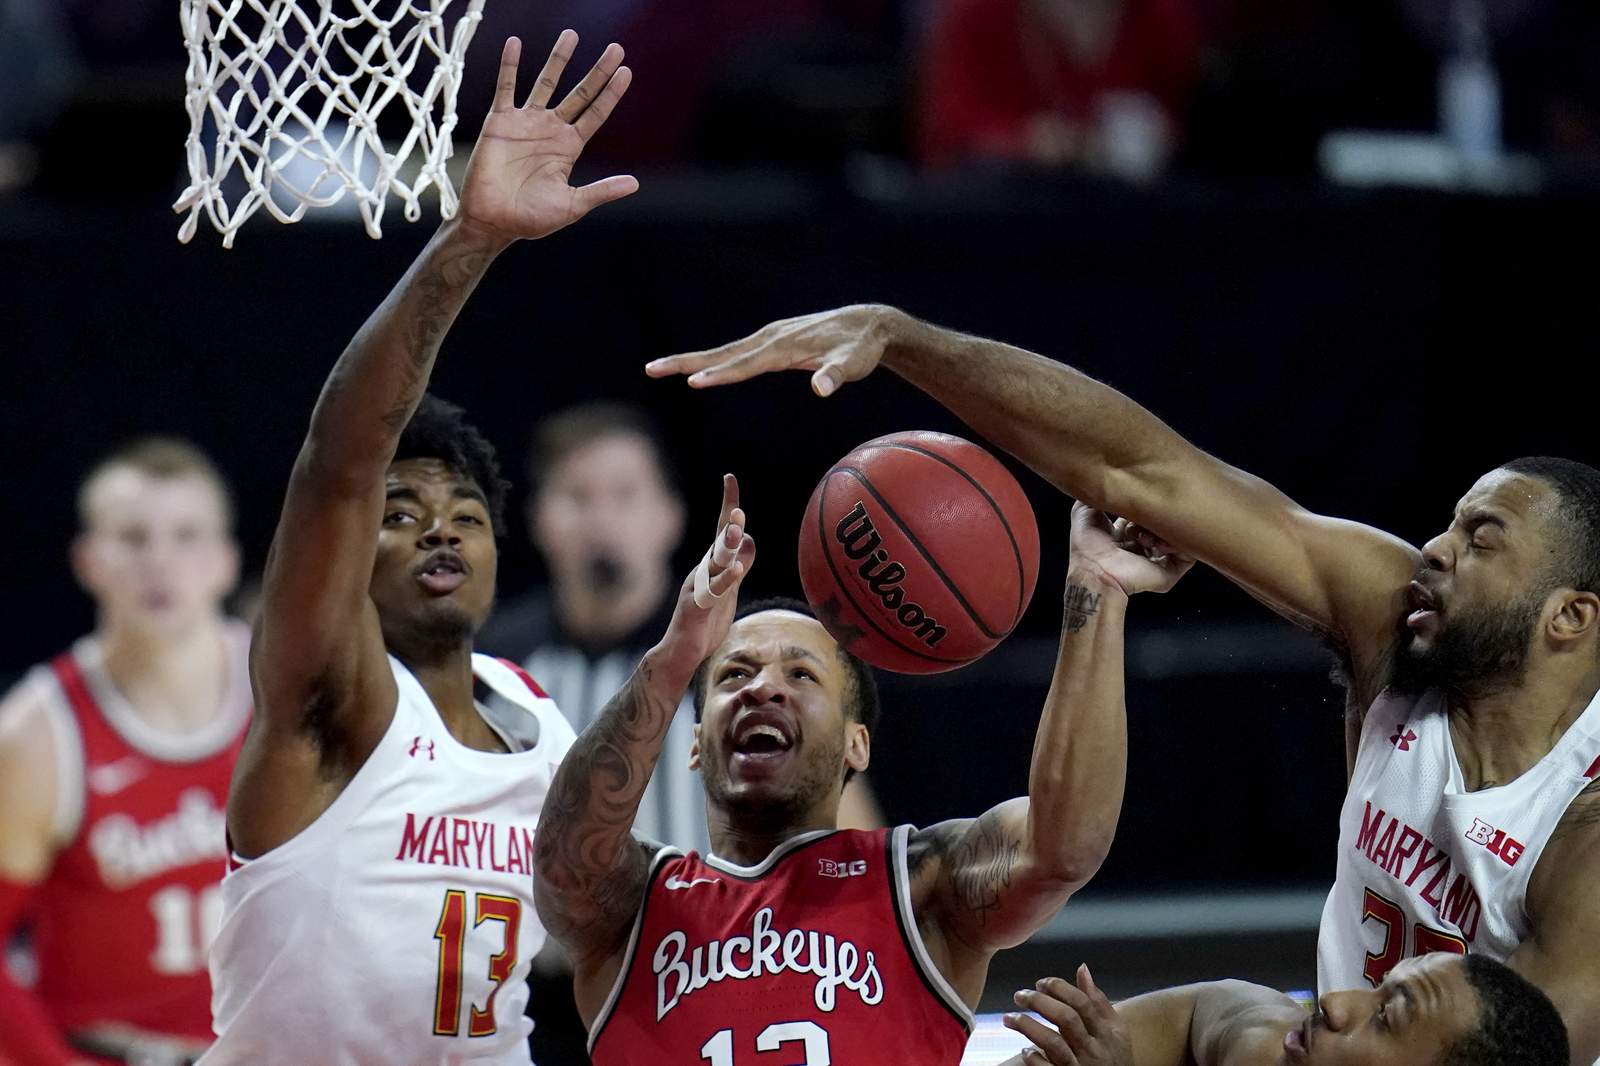 Young's 18 points help No. 4 Ohio State top Maryland 73-65